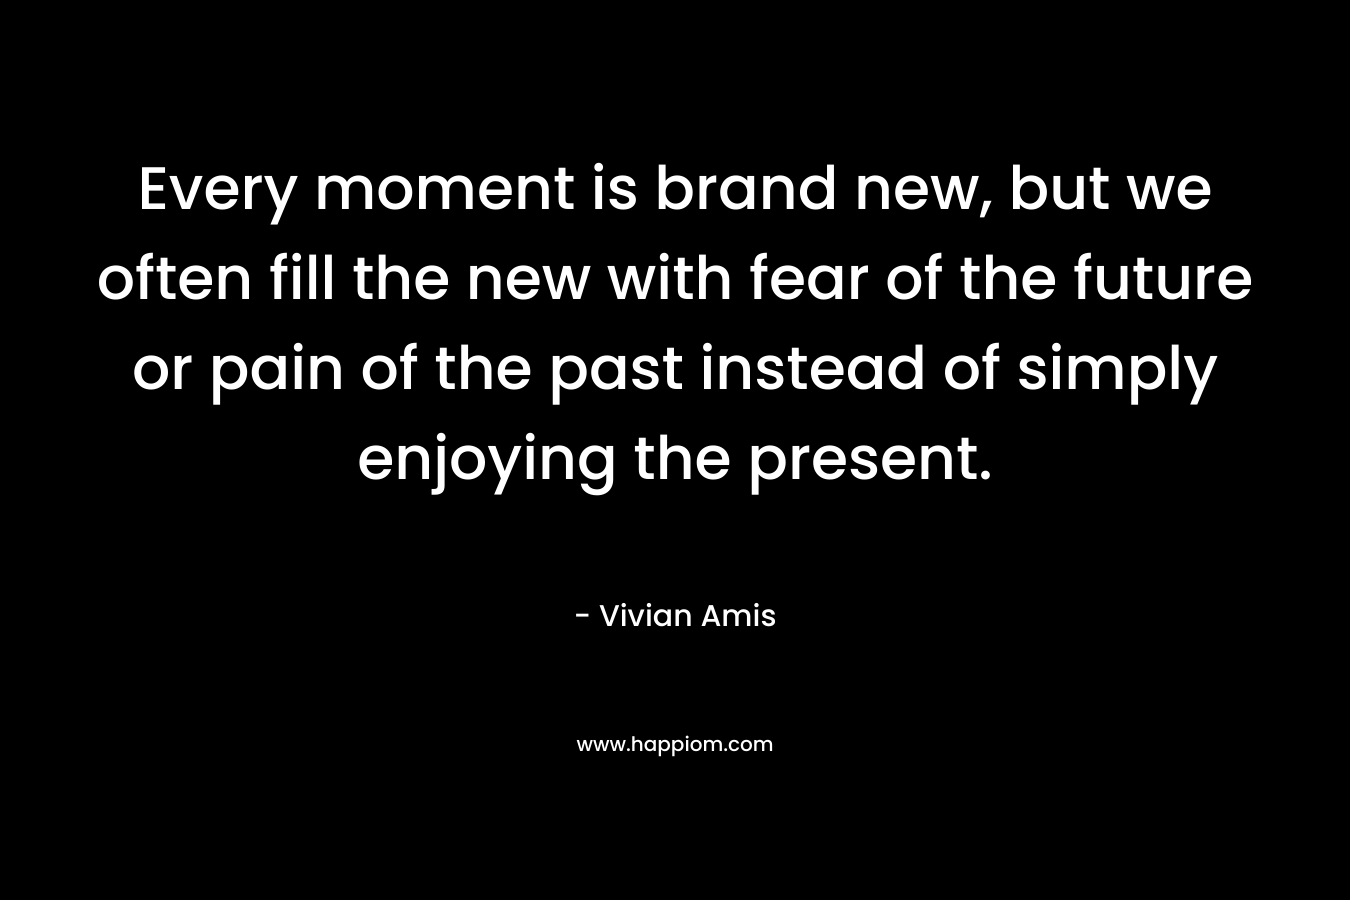 Every moment is brand new, but we often fill the new with fear of the future or pain of the past instead of simply enjoying the present.